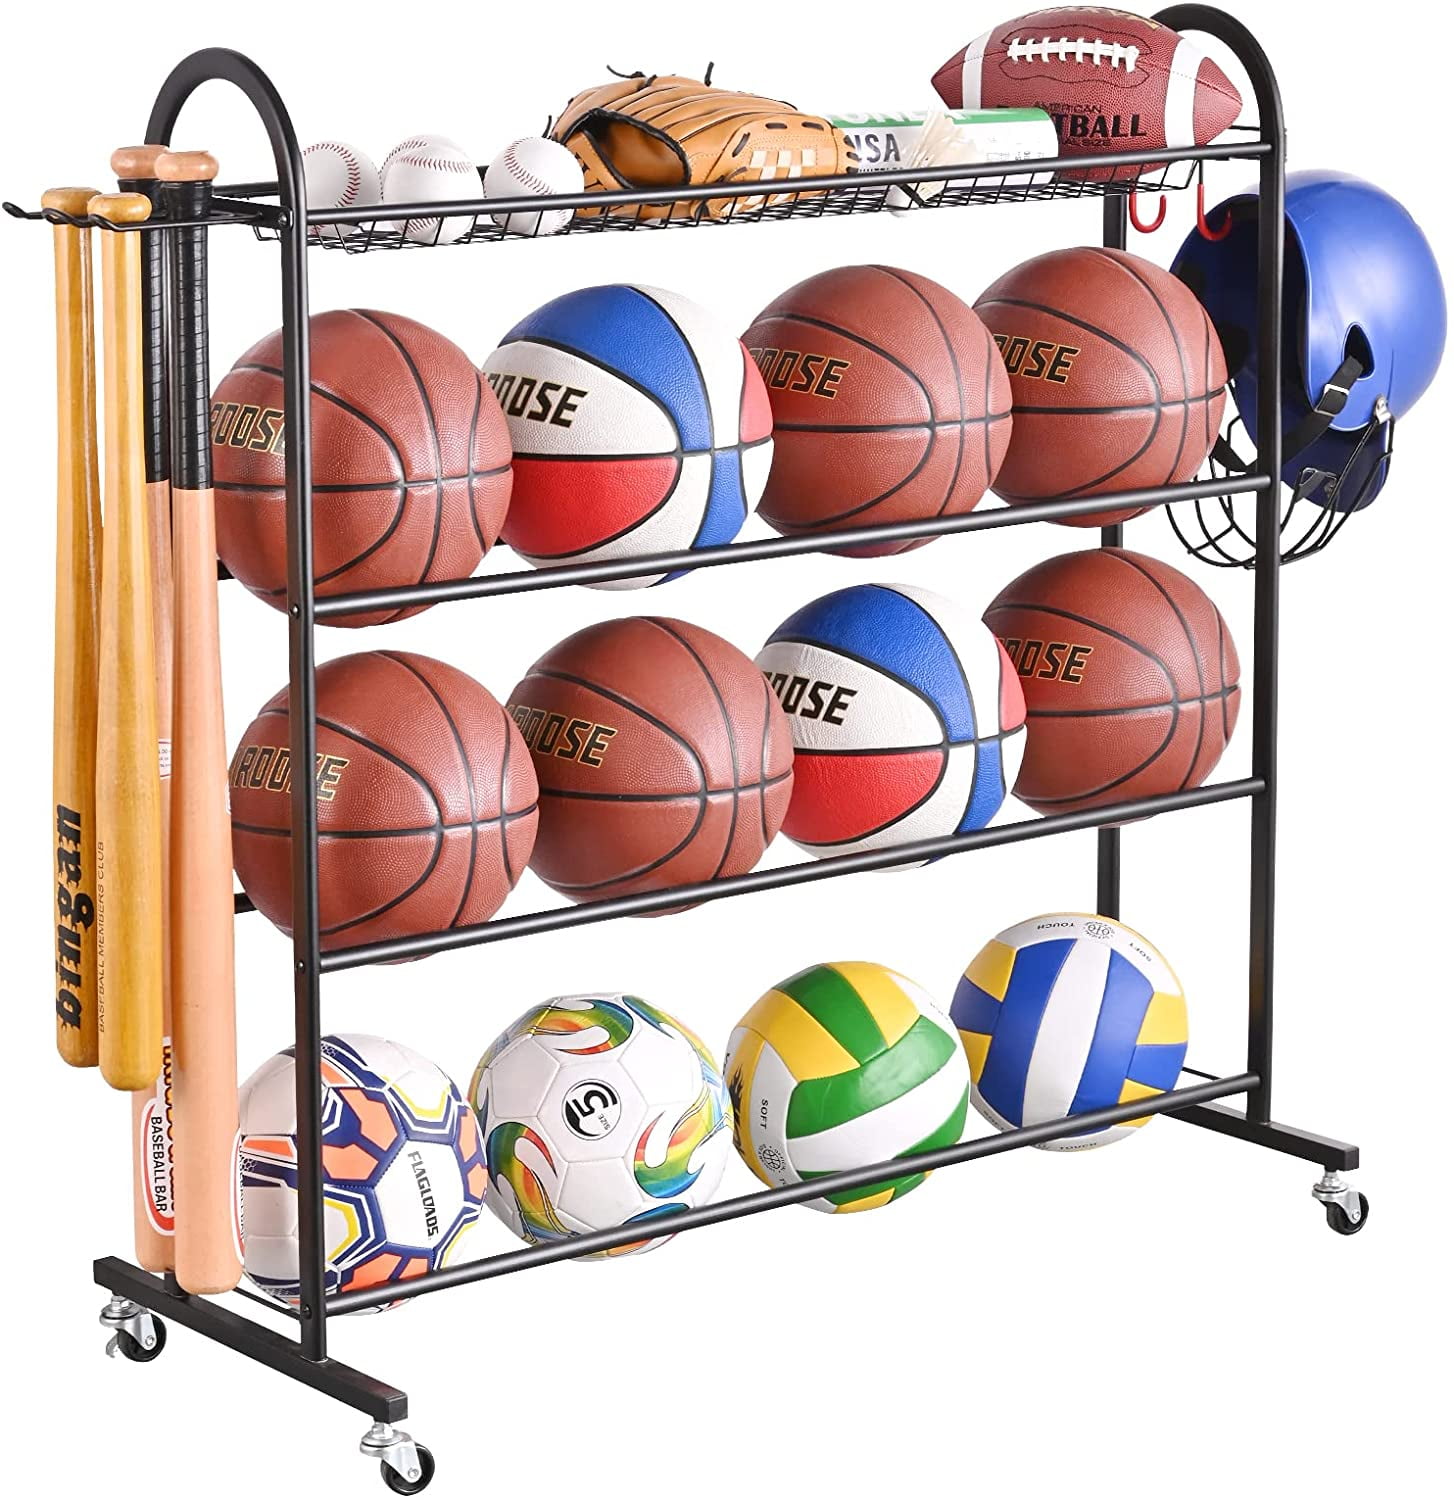 Holds up to 16 Athletic Balls Tandem Sport 4 Tier Ball Rack 